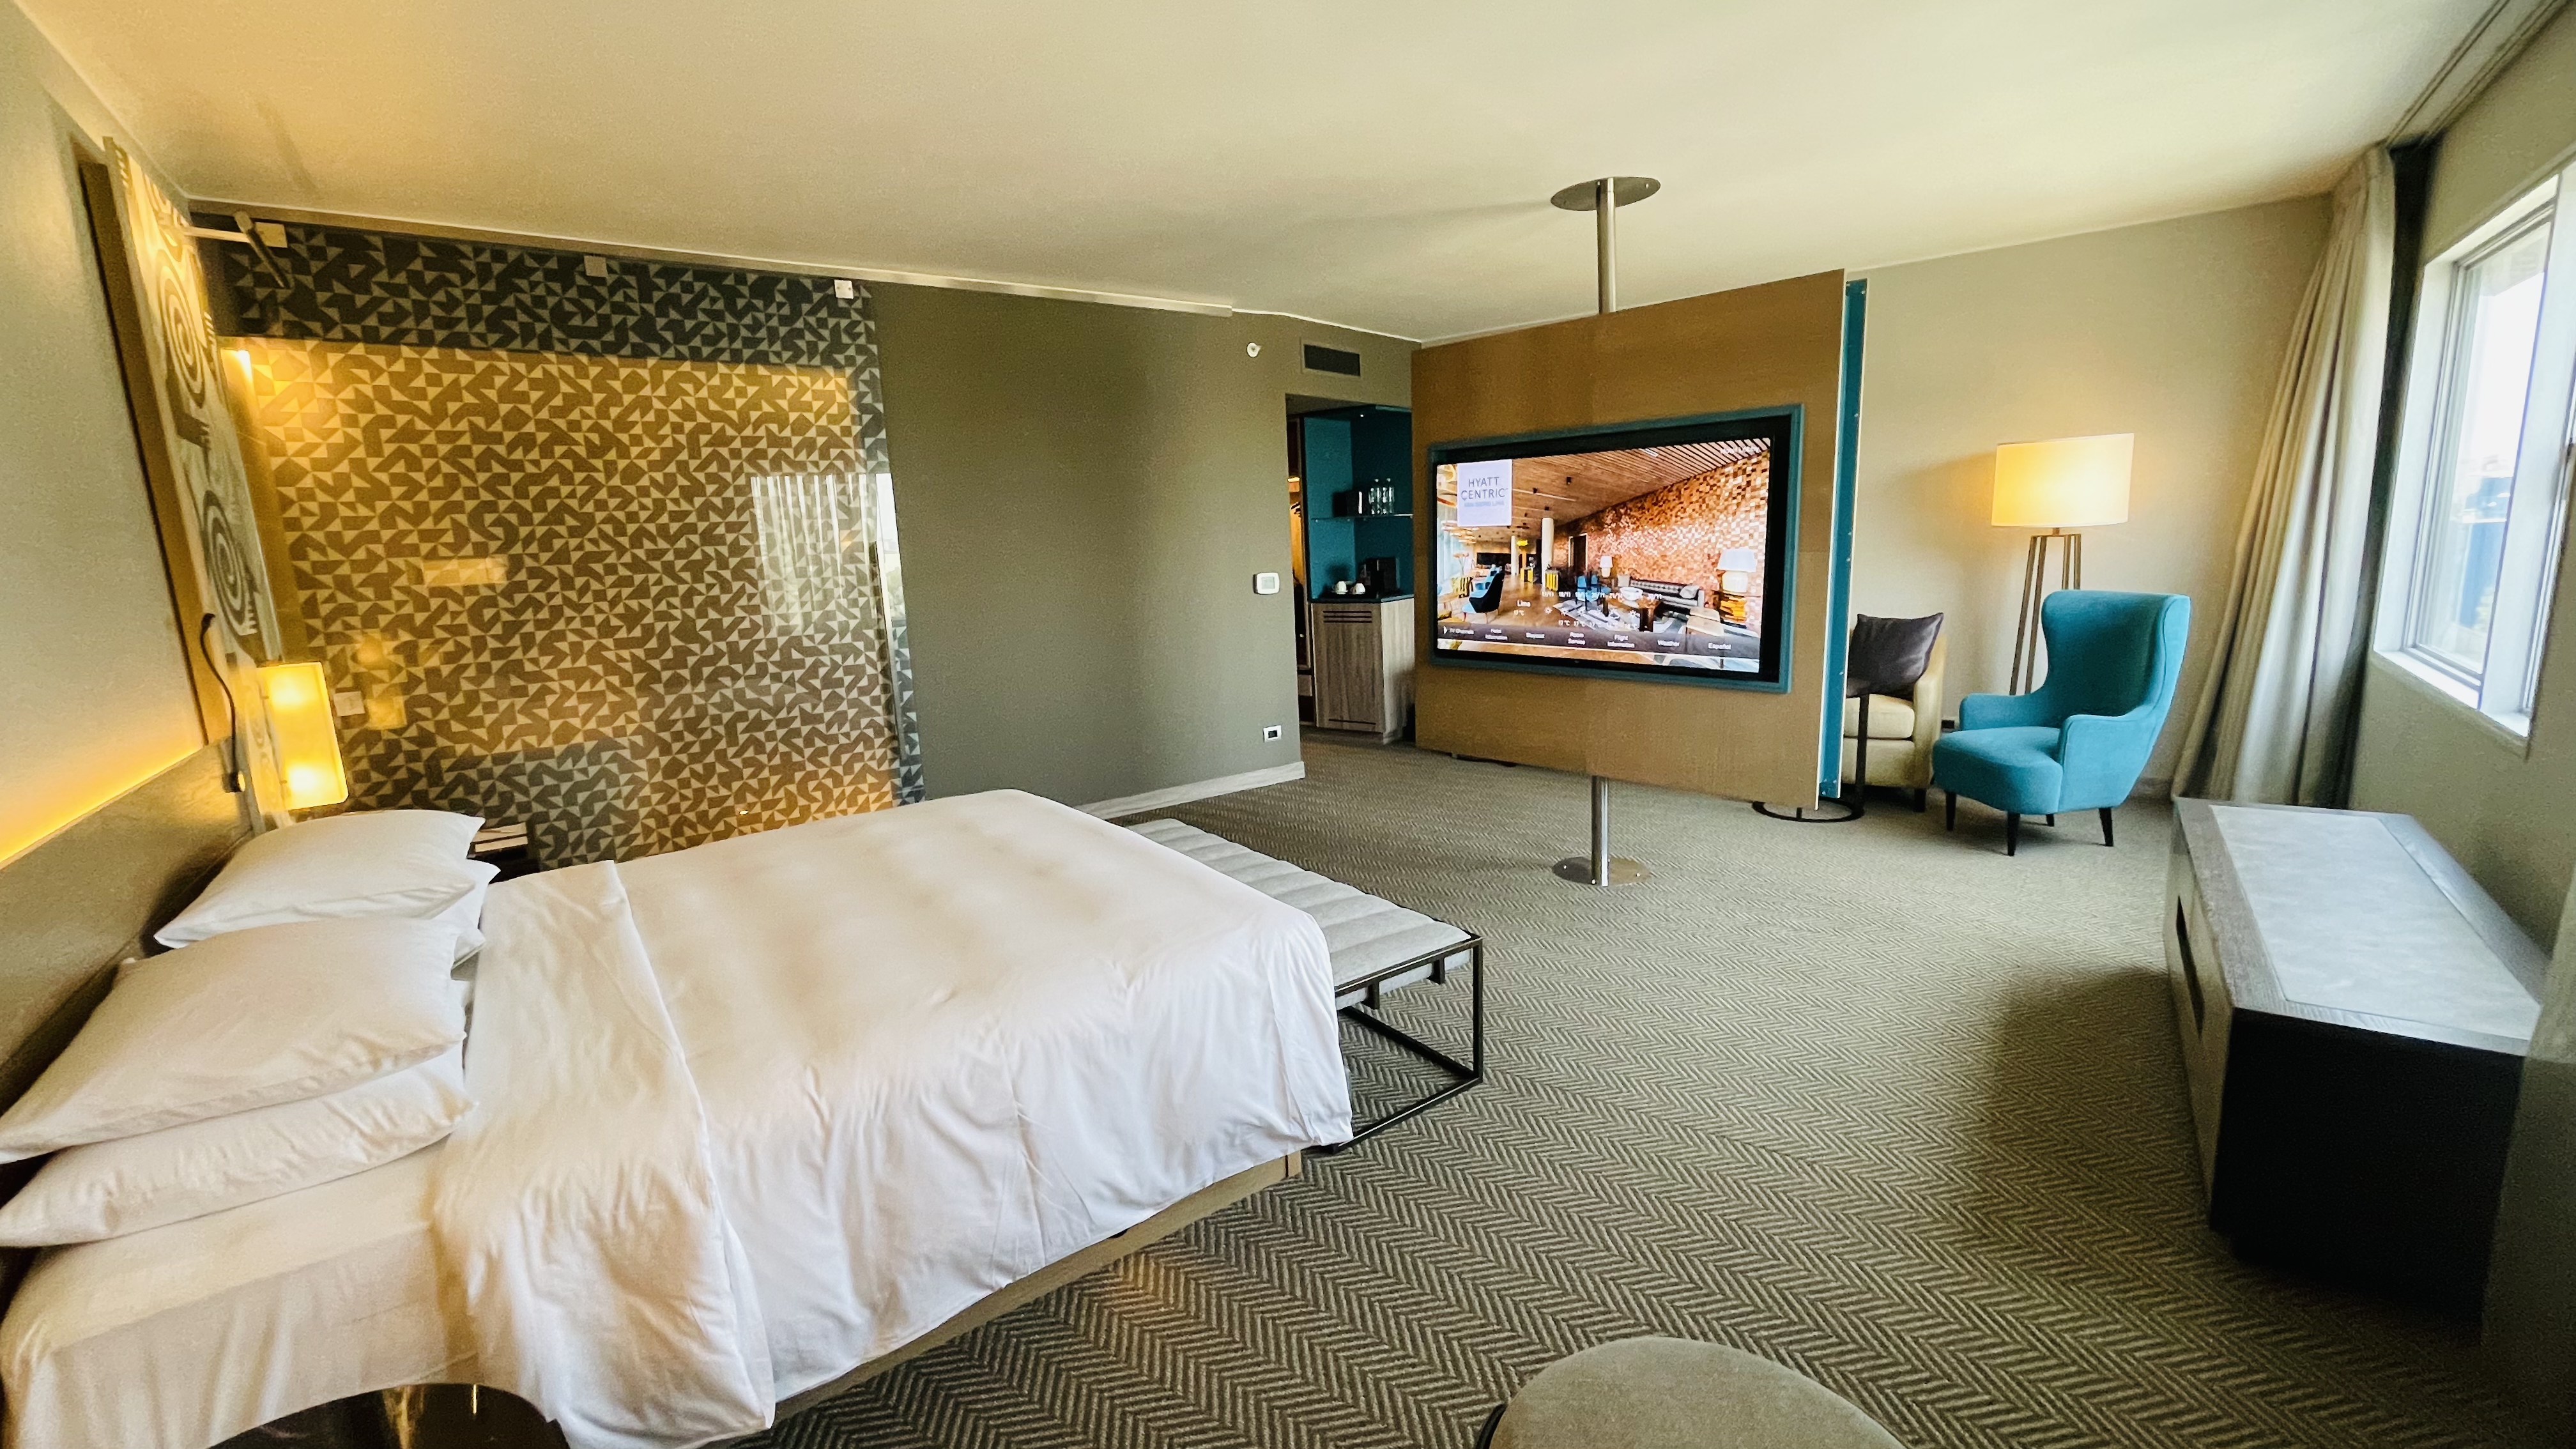 -Hyatt Centric San Isidro Lima-Junior Suite with Kind Bed